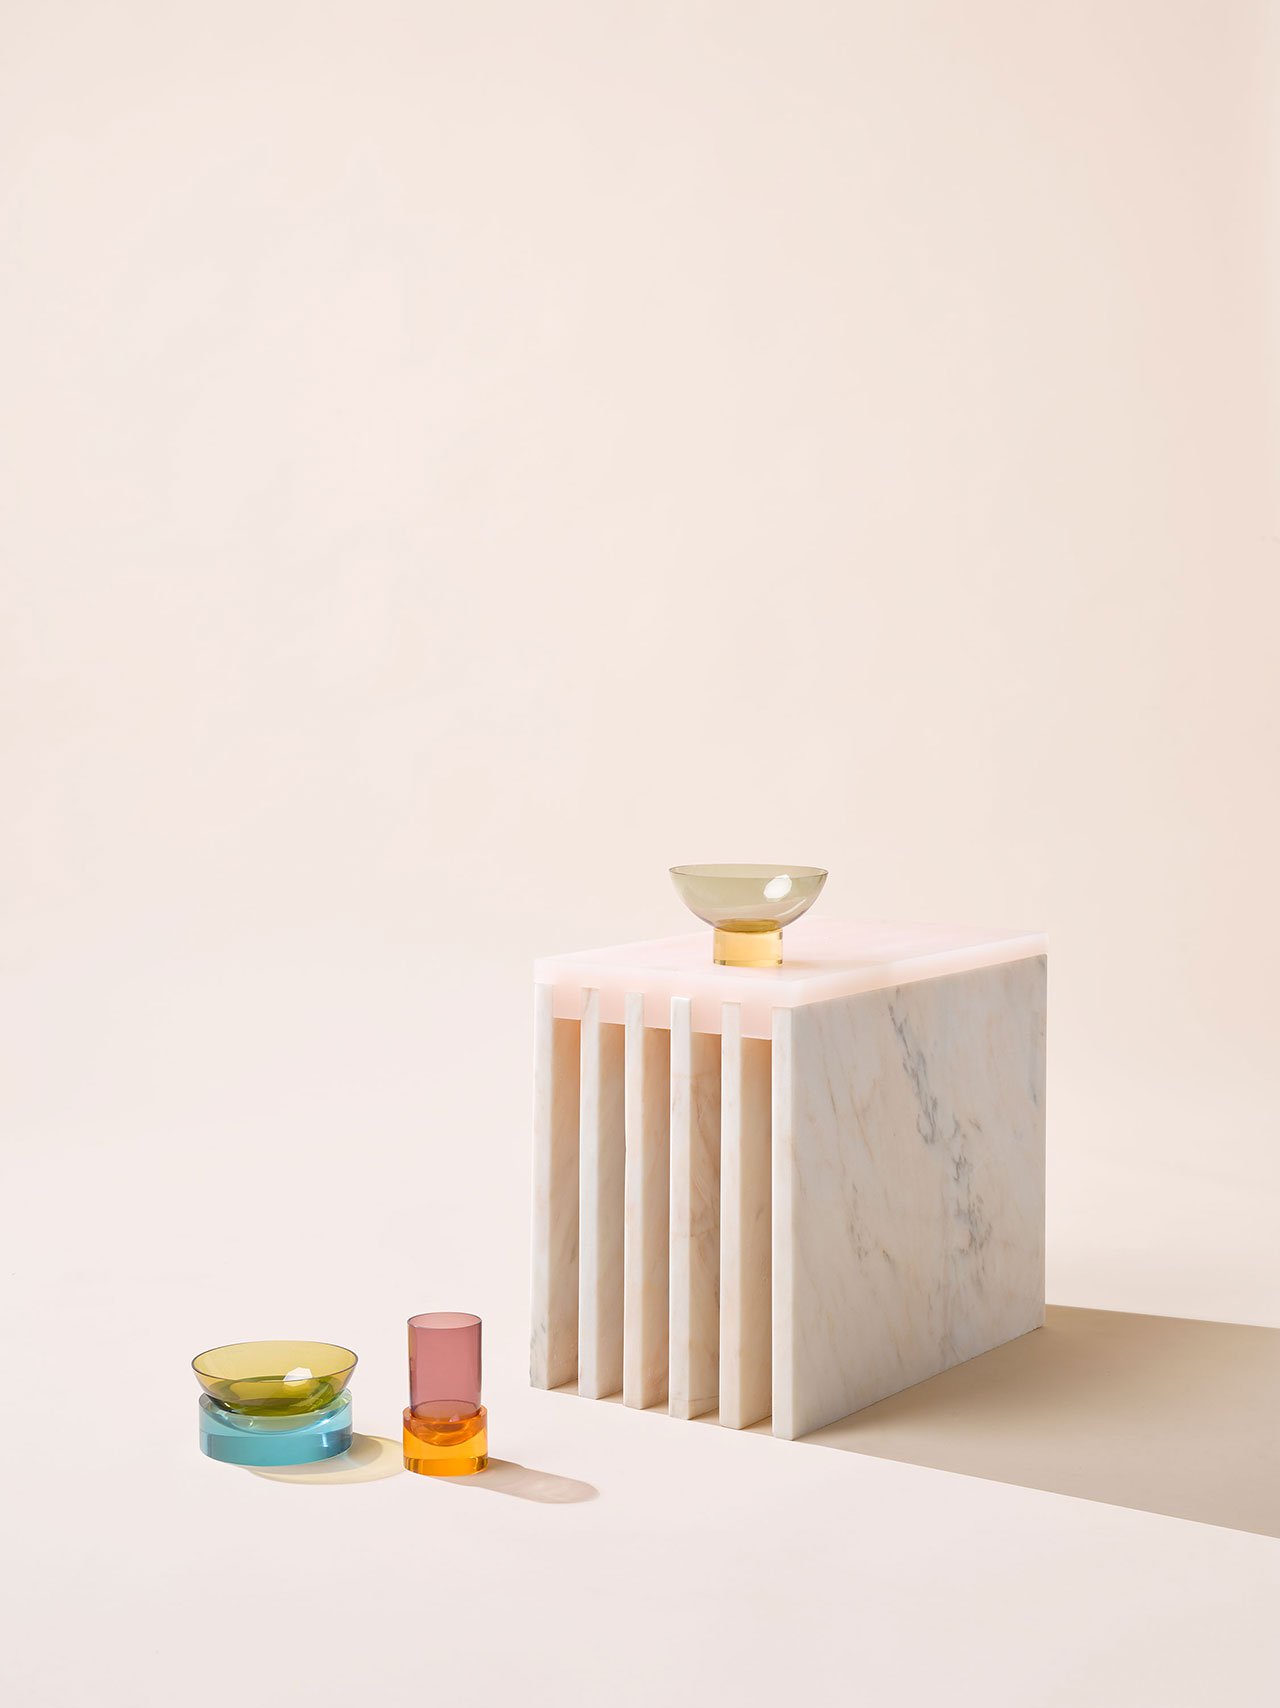 A Tale of Two Cities Athens  New York Based Design Studio ‘Objects of Common Interest’-65